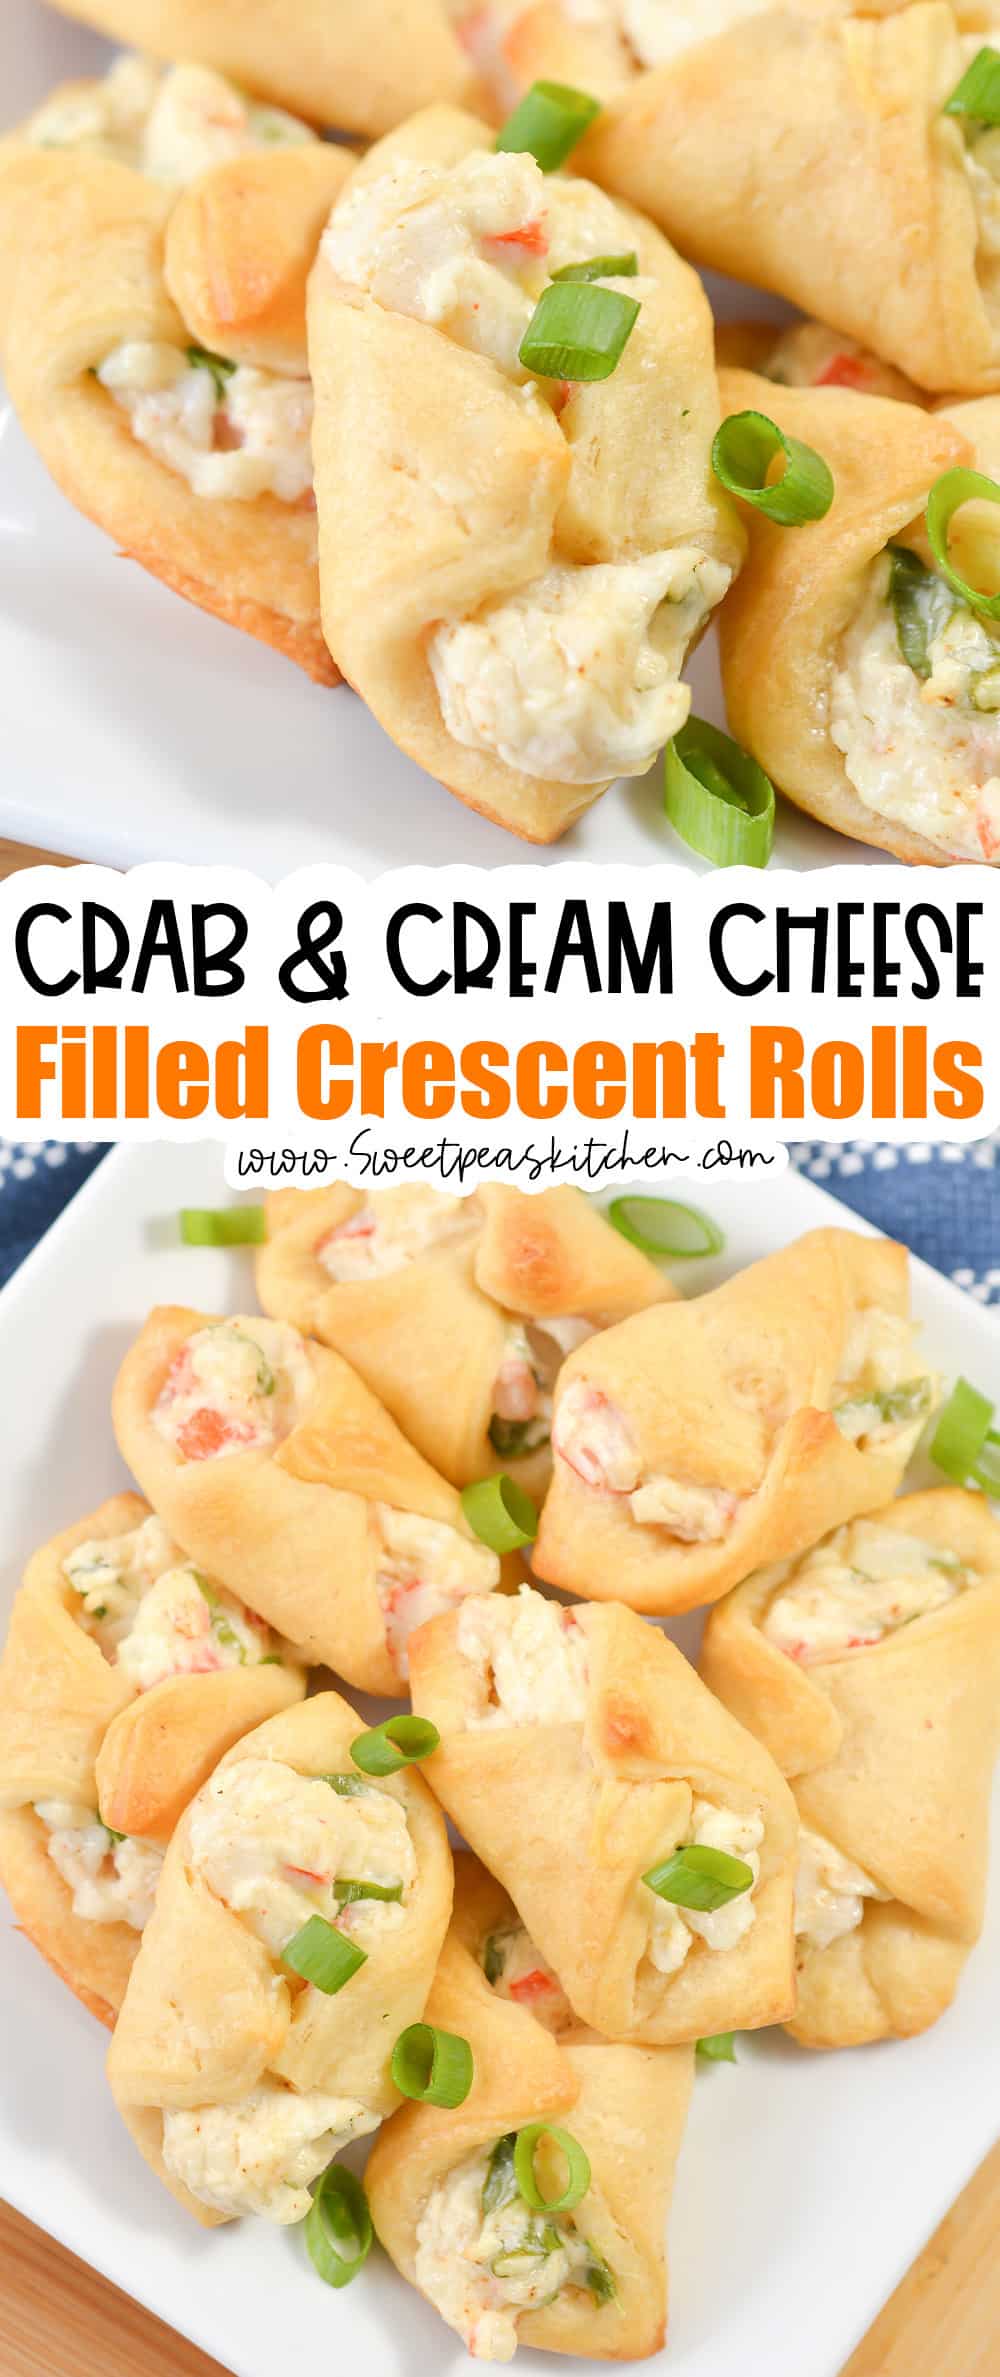 Crab and Cream Cheese Filled Crescent Rolls 